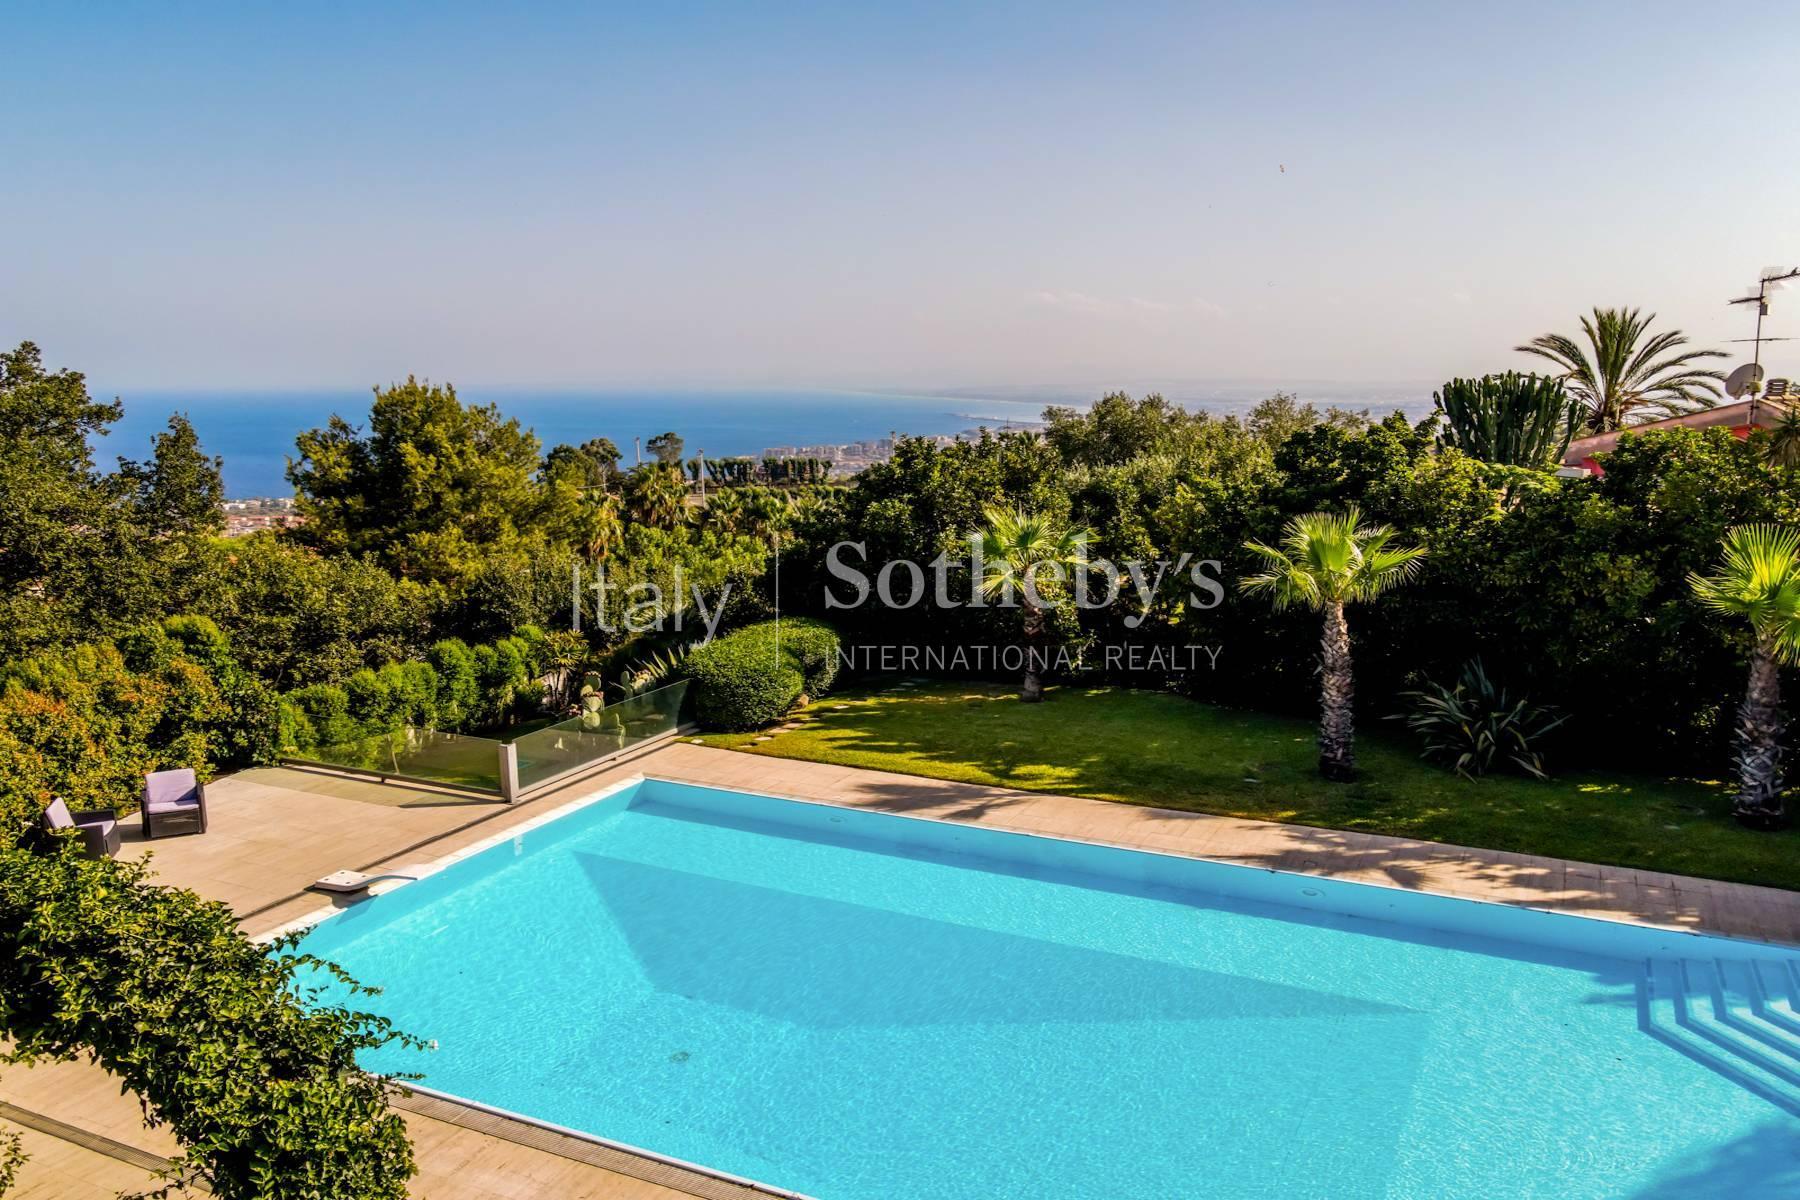 Sea view villa with pool on Etna's foothills - 13